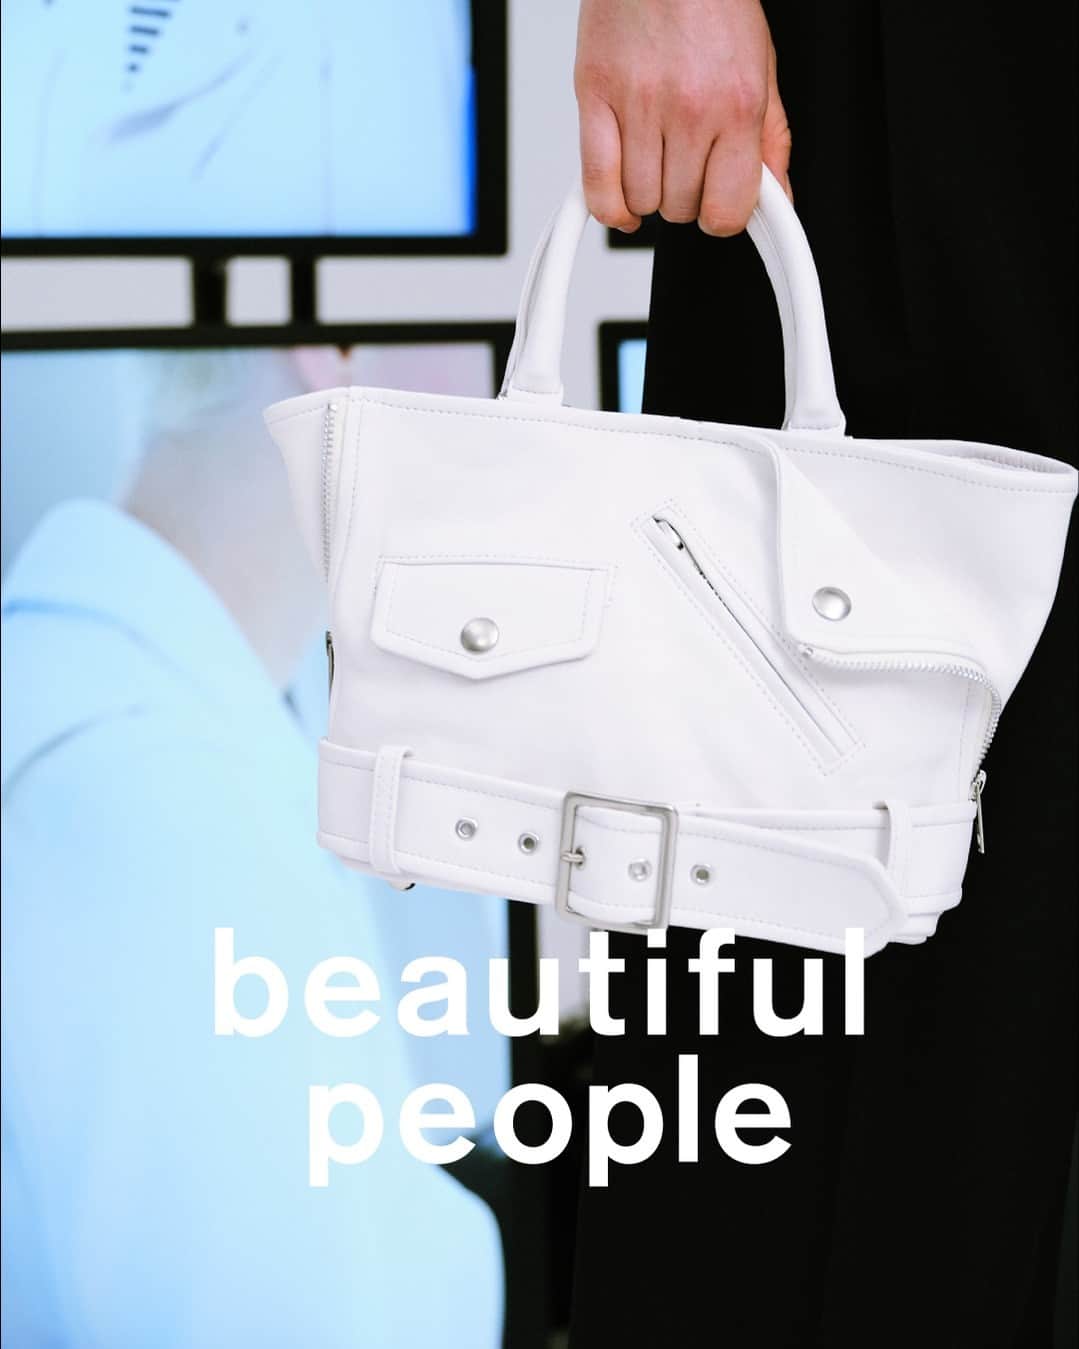 ビューティフルピープルのインスタグラム：「Pre-Spring 2024 Collection⁠ "FREE FROM STEREOTYPES"⁠ ⁠ ◻︎⁠color riders Kids tote bag  Color: white / Pink ⁠ ⁠ ーーー⁠ ⁠ 固定概念から自由になる。⁠ ⁠ 私たちには「英国的だね」「西海岸の雰囲気だ」 ⁠ というステレオタイプのイメージが存在する。⁠ ⁠ それは玄人にも素人にも。⁠ ⁠ ステレオタイプを逆手にとって、⁠ 自由なクリエーションを表現しよう。⁠ ⁠ ⁠ 普遍的な視点を変えるとどうなるのだろうか。⁠ ⁠ ⁠ 正面ではない別の角度からとらえることで昇華するパターン。⁠ ディテールを異なる位置、異なる素材に置き換えることで生まれる新たなデザイン。⁠ ⁠ 固定された概念から解き放たれ、 ⁠ 新しいものさしを携えるコレクション。⁠ ⁠ ⁠ What happens when you reverse the stereotypes and express your free creation?⁠ What happens when you change the universal point of view?⁠ ⁠ Patterns sublimate by being seen from a different angle than the front. New designs are created by replacing details with different positions and materials.⁠ ⁠ A collection design based on the classic items but breaking free from the normals.⁠ A collection that is free from fixed concepts and carries a new perspective.⁠ ⁠ Free from stereotypes.⁠ ⁠ －－－⁠ ⁠ ■Online store⁠ www.beautiful-people.jp⁠ ※ 11/18 - 12/8 までの期間中に、予約分は国内送料無料にてお届けします。⁠ ⁠ ■Global Online store⁠ www.beautiful-people-creations-tokyo.com⁠ ⁠ ■ 青山店⁠⁠⁠⁠ 東京都港区南青山3-16-6⁠⁠⁠⁠ ⁠⁠⁠⁠ ■ 新宿伊勢丹店⁠ 伊勢丹新宿店本館2階　⁠⁠⁠⁠TOKYOクローゼット/リ・スタイルTOKYO⁠⁠⁠⁠ ⁠⁠⁠⁠ ■ 渋谷PARCO店⁠ 渋谷パルコ2階⁠ ⁠ ■ ジェイアール名古屋タカシマヤ店⁠ ジェイアール名古屋タカシマヤ4階　モード＆トレンド「スタイル＆エディット」⁠⁠⁠⁠ ⁠⁠⁠⁠ ■⁠阪急うめだ店⁠ 阪急うめだ本店3階　モード⁠⁠⁠⁠ ⁠ #beautifulpeople⁠ #ビューティフルピープル⁠ #DOUBLEEND⁠ #ダブルエンド⁠ #FreefromStereotypes⁠ #everythingisbeautiful⁠ ⁠」